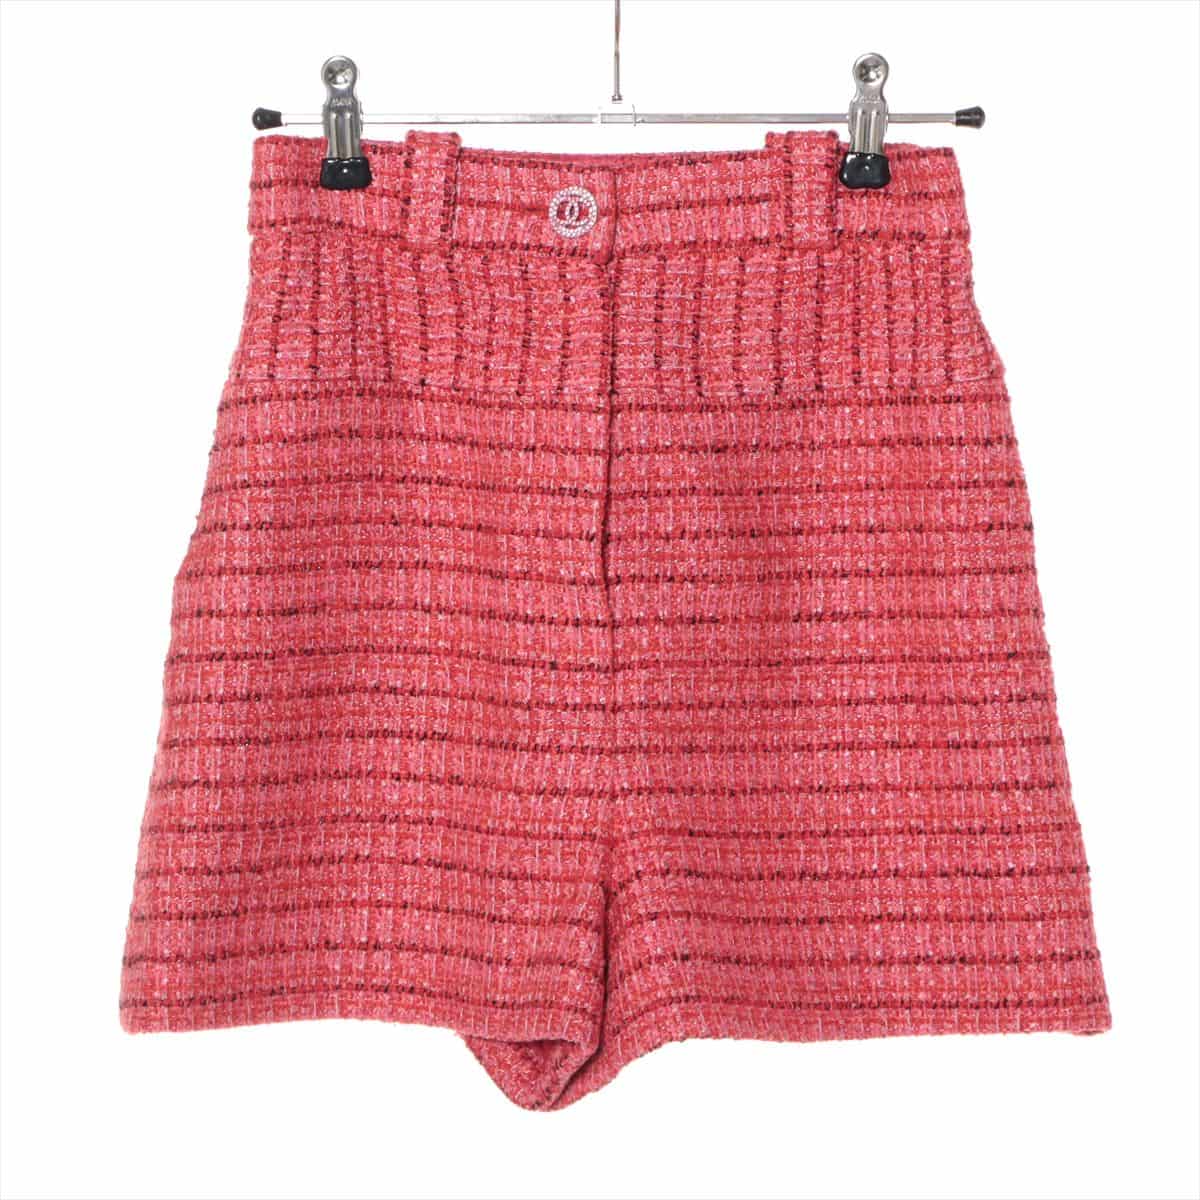 Chanel Coco Button P63 Tweed Short pants 34 Ladies' Red